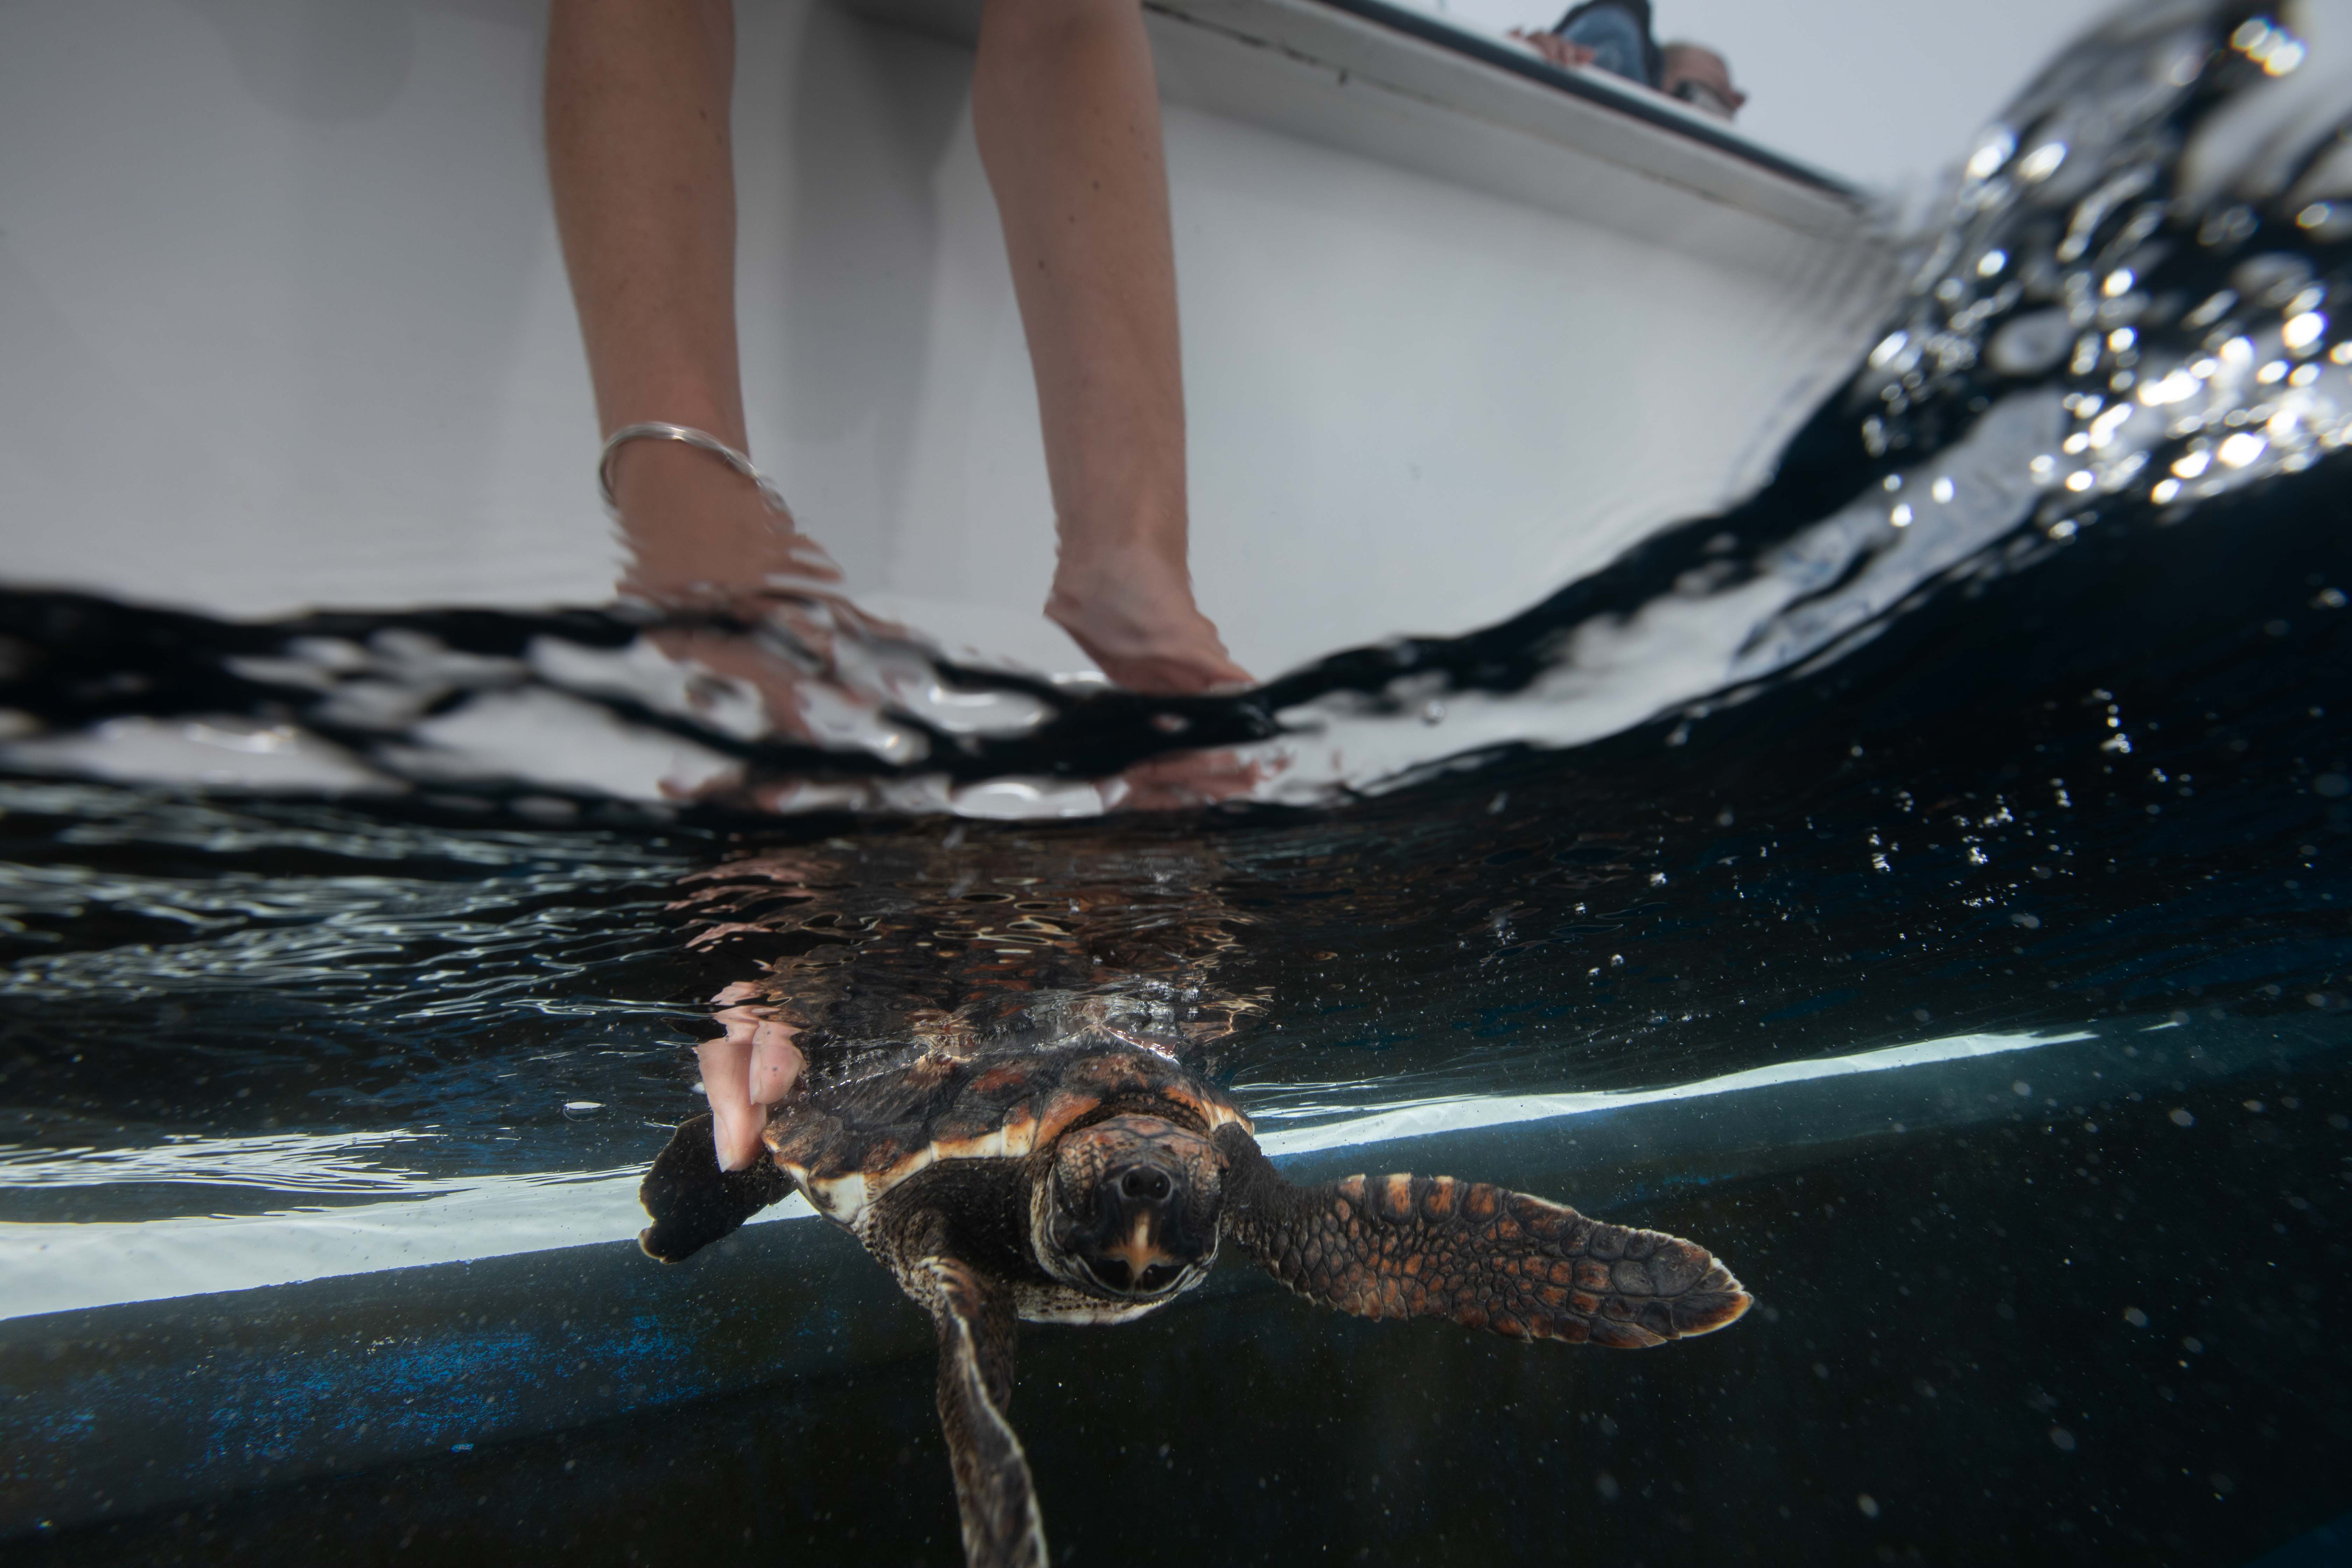 44 Sea Turtles Rehabilitated And Released Back Into The Wild!